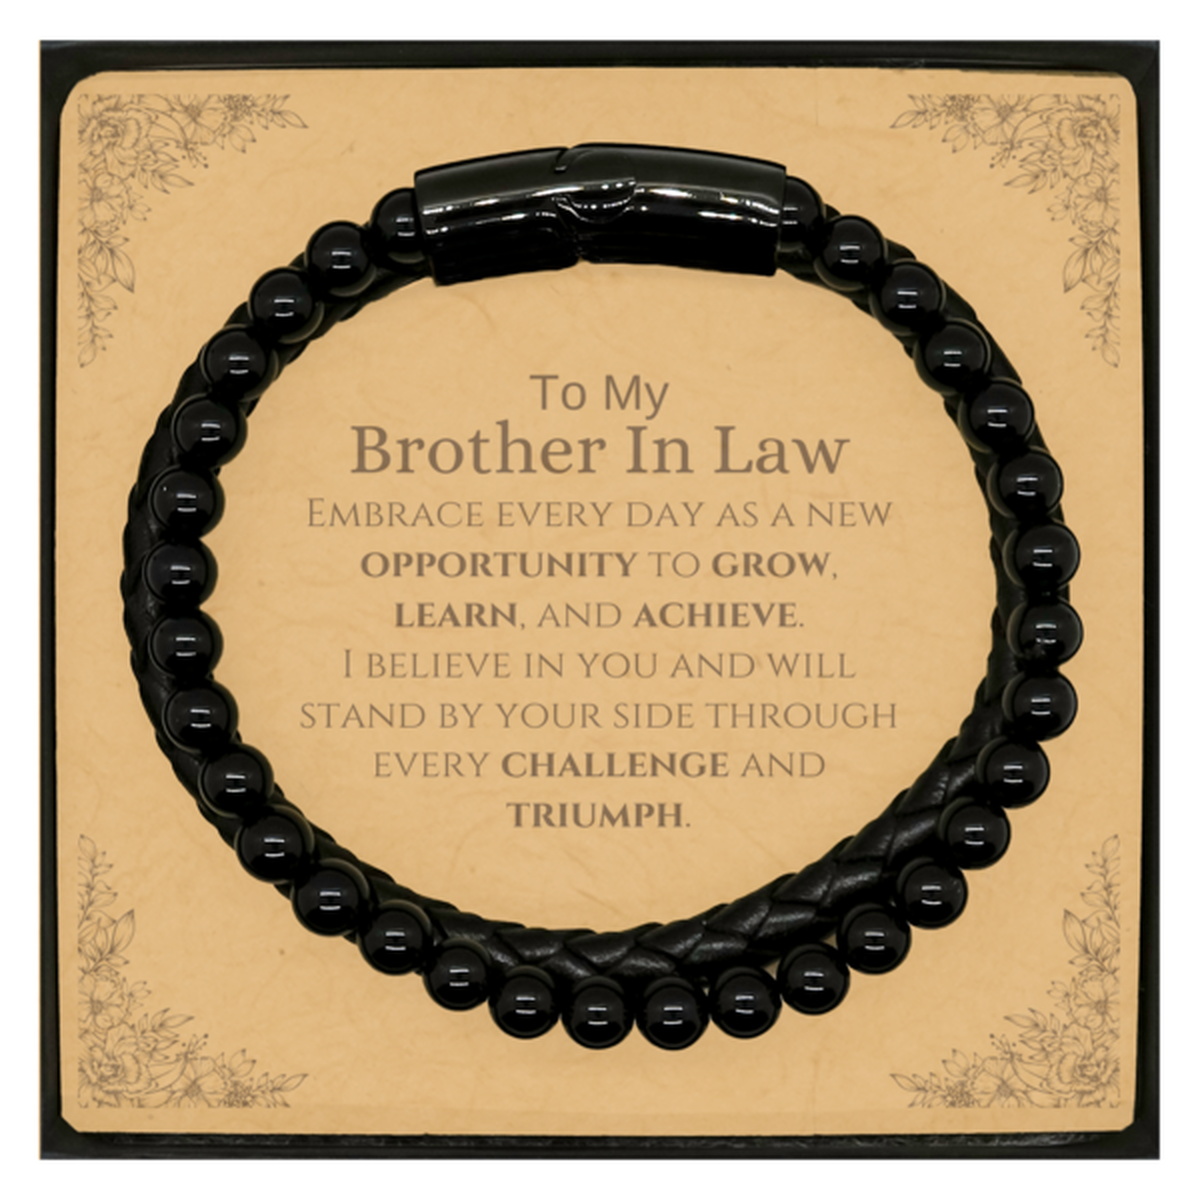 To My Brother In Law Gifts, I believe in you and will stand by your side, Inspirational Stone Leather Bracelets For Brother In Law, Birthday Christmas Motivational Brother In Law Gifts